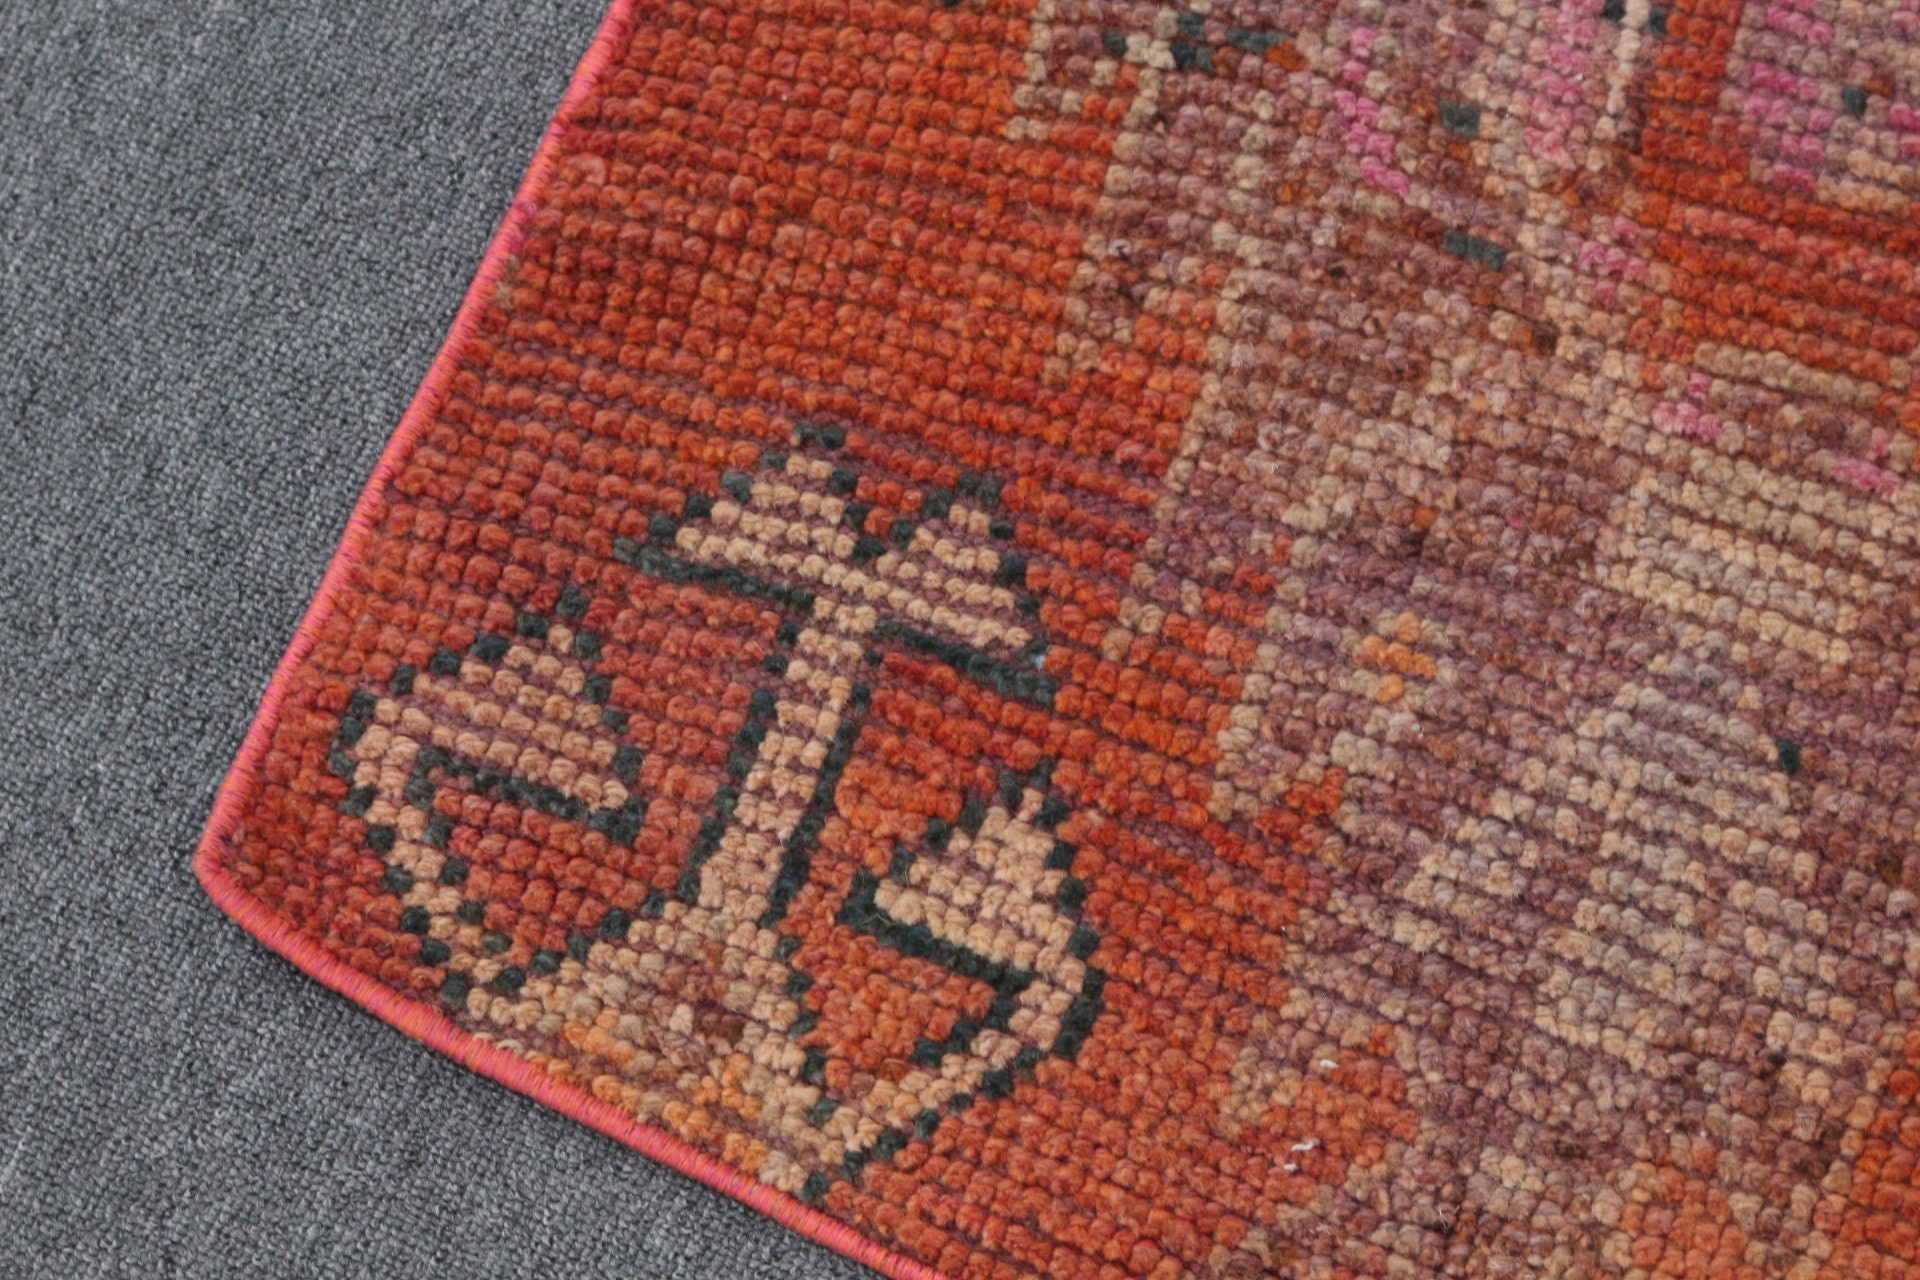 Antique Rug, Vintage Rug, Red Antique Rug, Entry Rugs, Turkish Rugs, Rugs for Entry, Oriental Rug, 2.2x3 ft Small Rugs, Wall Hanging Rugs